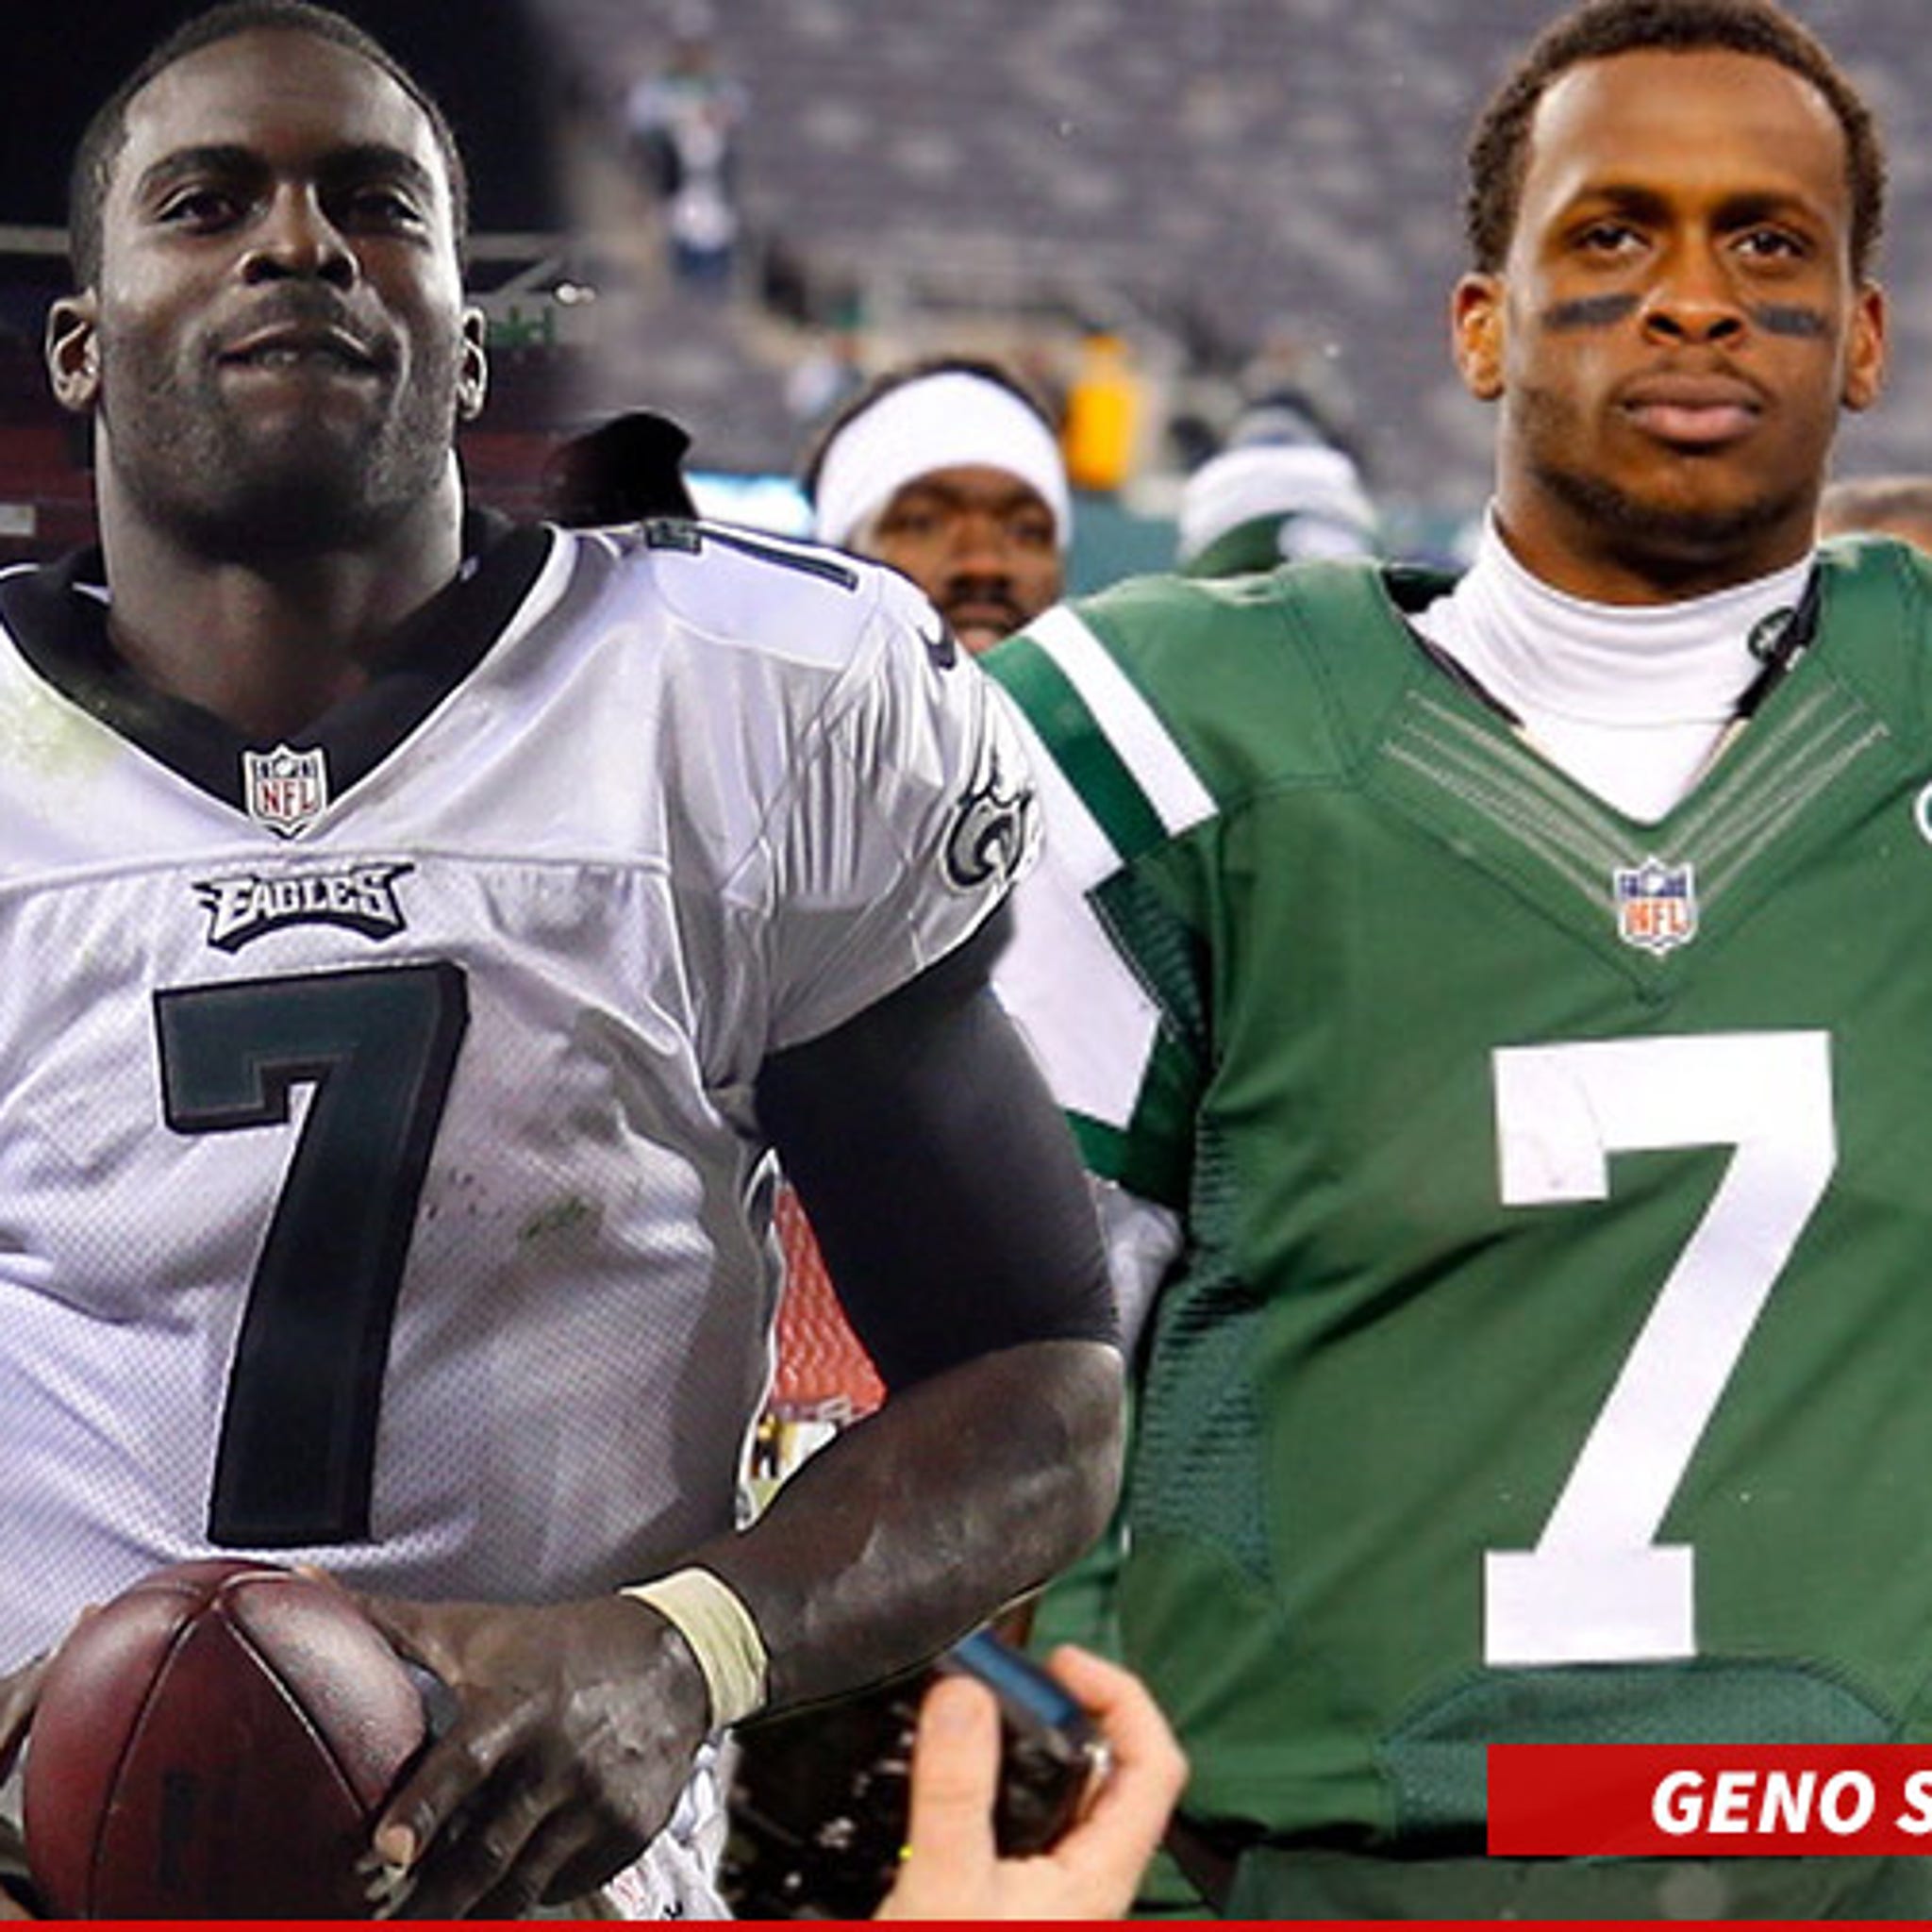 Michael Vick -- Jersey Number Could Be Huge Problem in Negotiation